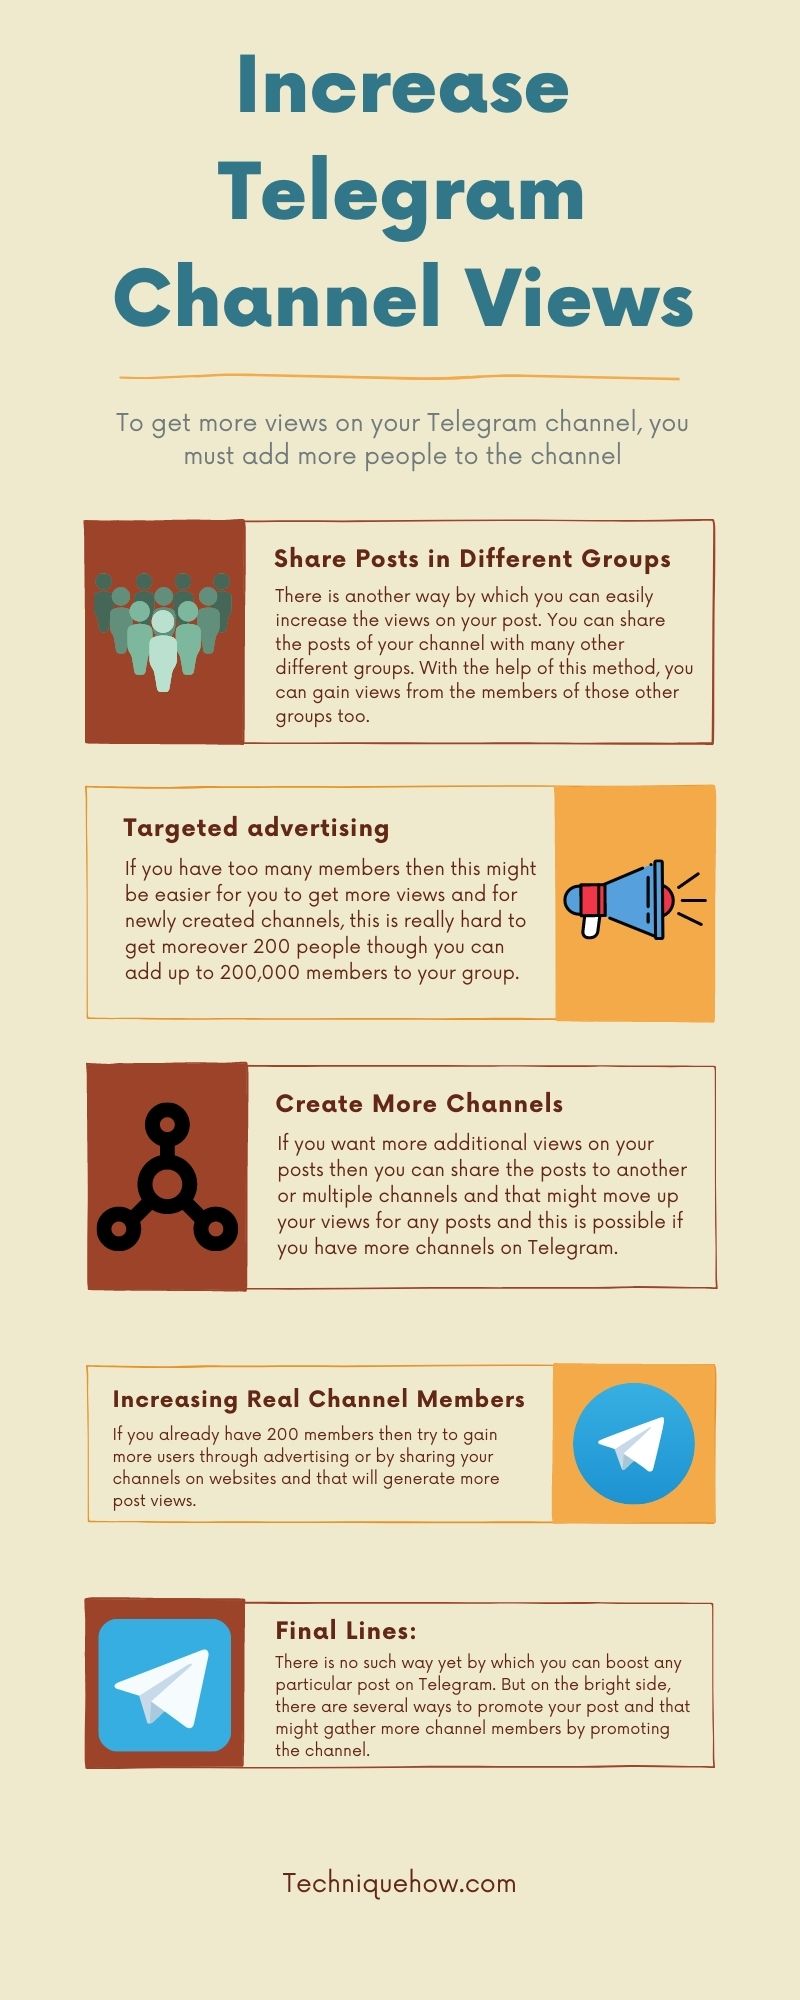 infographic_Increase Telegram Channel Views